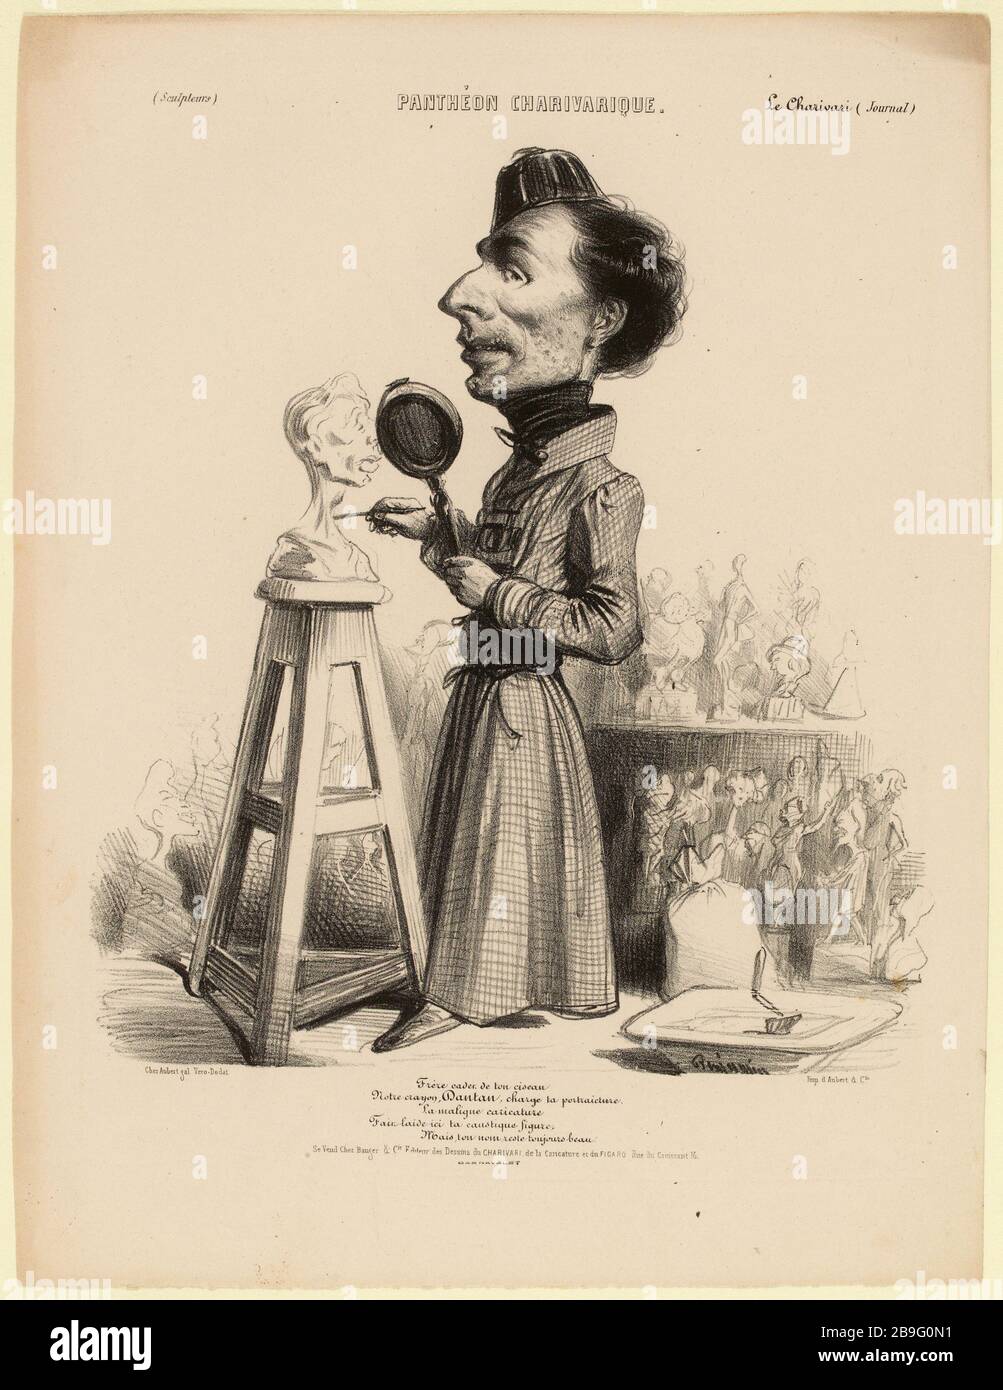 younger brother thy tool Our pencil Dantan, load your portraiture. The malignant caricature Done ugly here ... your caustic (listed security (letter)) | Jean-Pierre Dantan (1800-1869) (dummy title) | PANTHEON CHARIVARIQUE, No. 67 (as a whole). Stock Photo